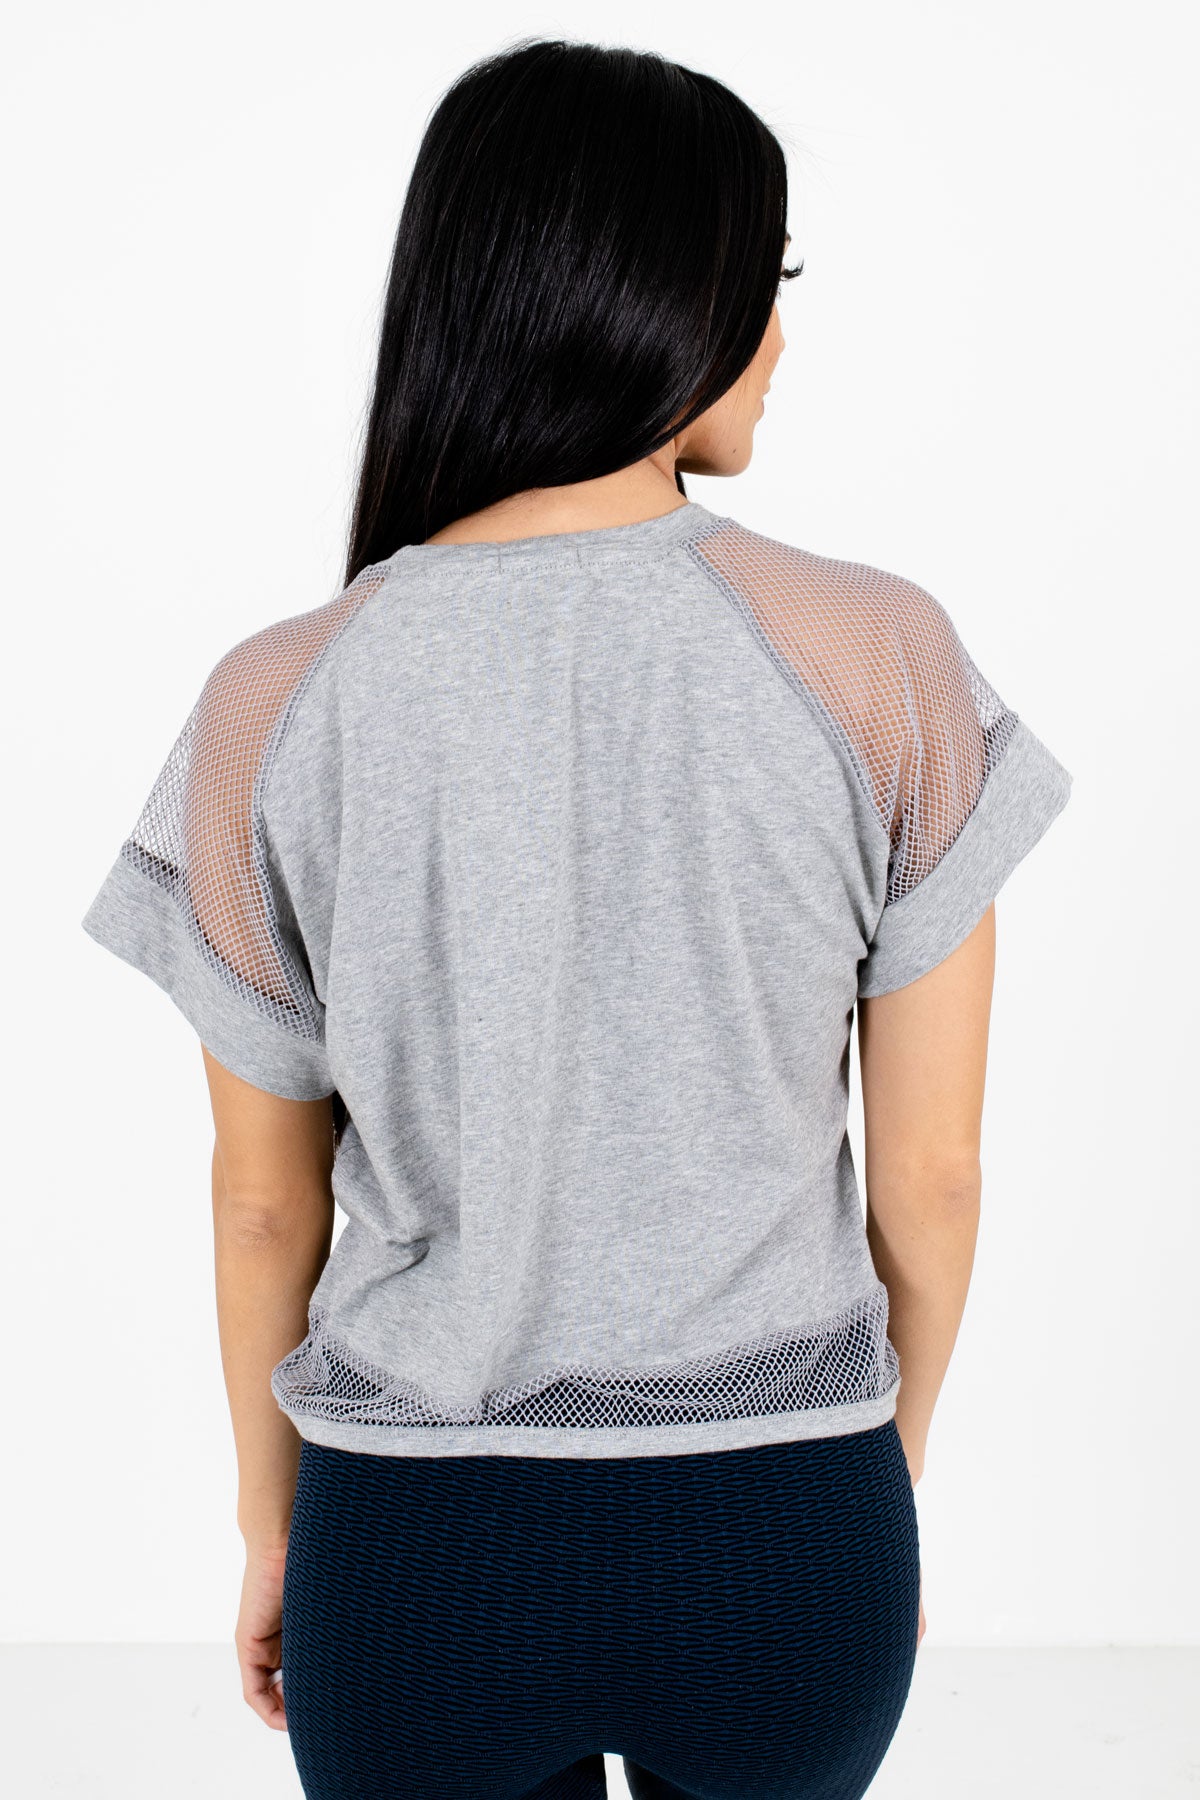 Women’s Heather Gray High-Quality Lightweight Material Boutique Active Tee